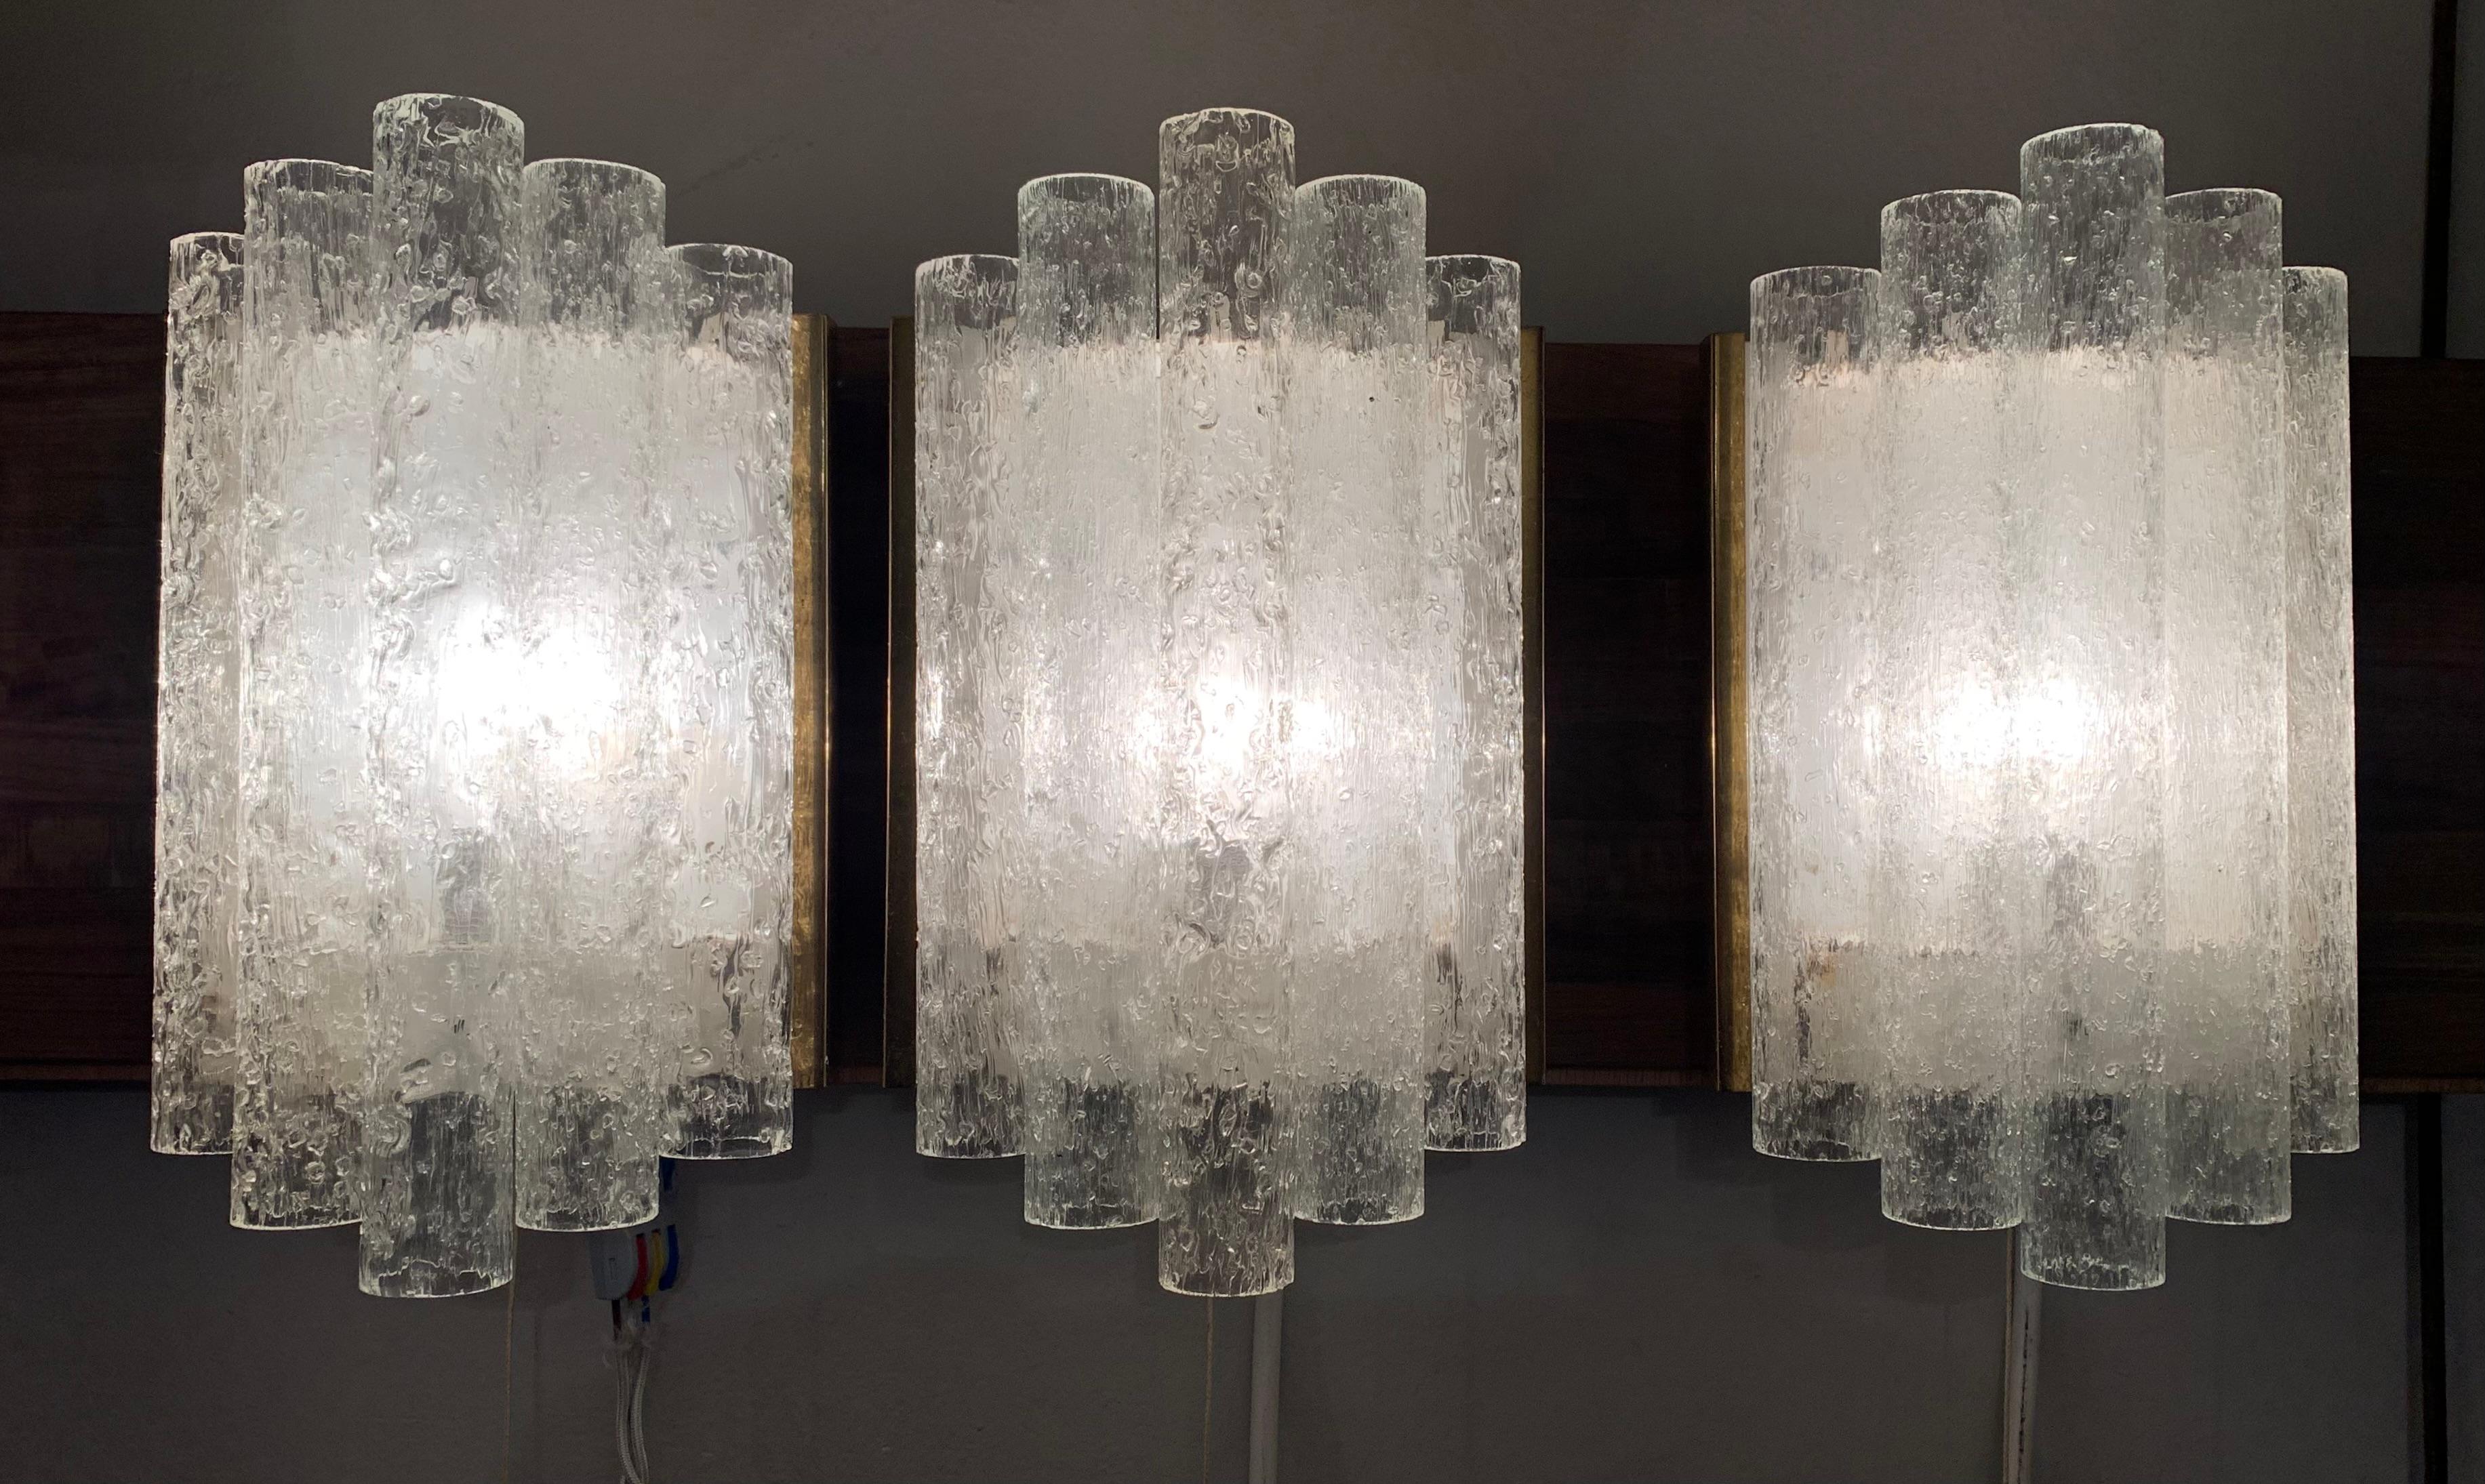 1960s wall sconces/wall lights with vertical ice-glass frosted tubes positioned at varying heights at either side of a single central longer tube. Manufactured by Doria Leuchten in German during the 1960s. Each tube has a small hole which allows